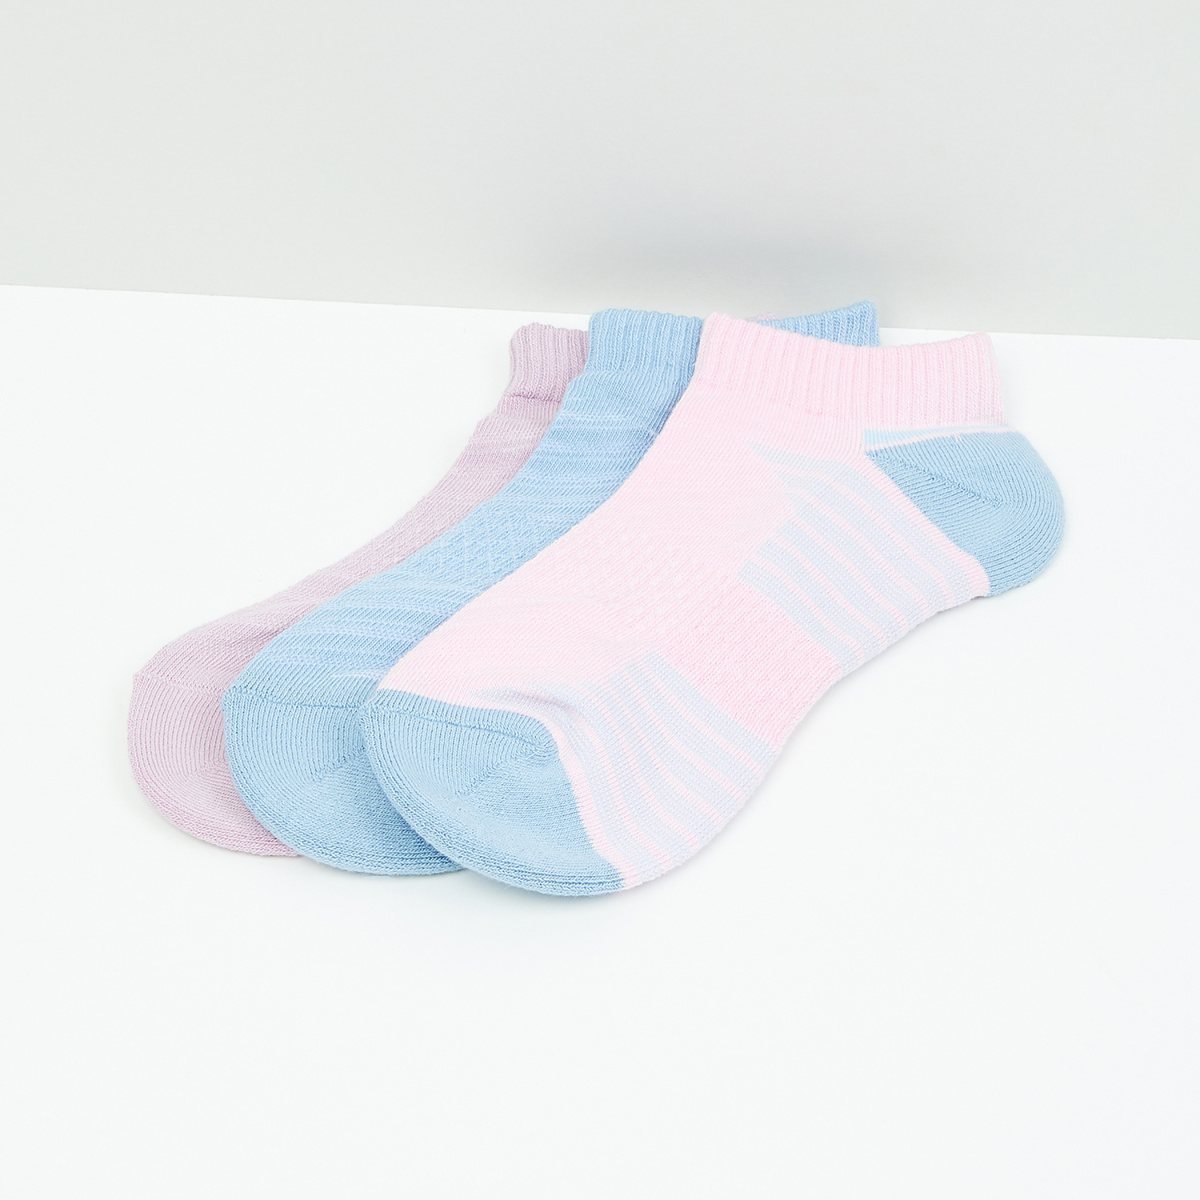 MAX Textured Socks - Pack of 3